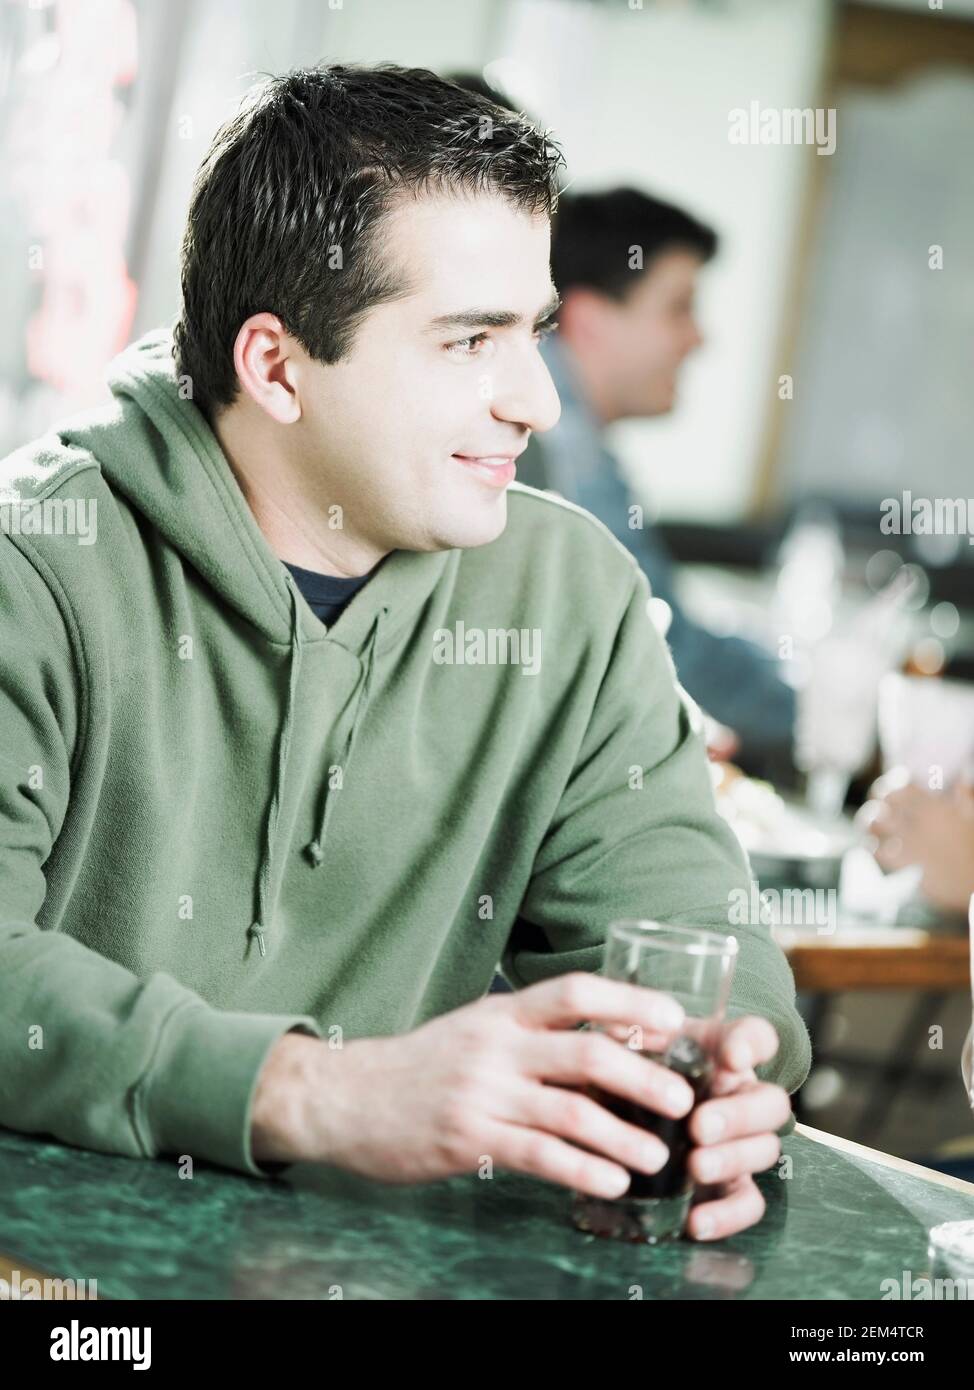 Close-up of a young man holding a glass of wine in a restaurant Stock Photo